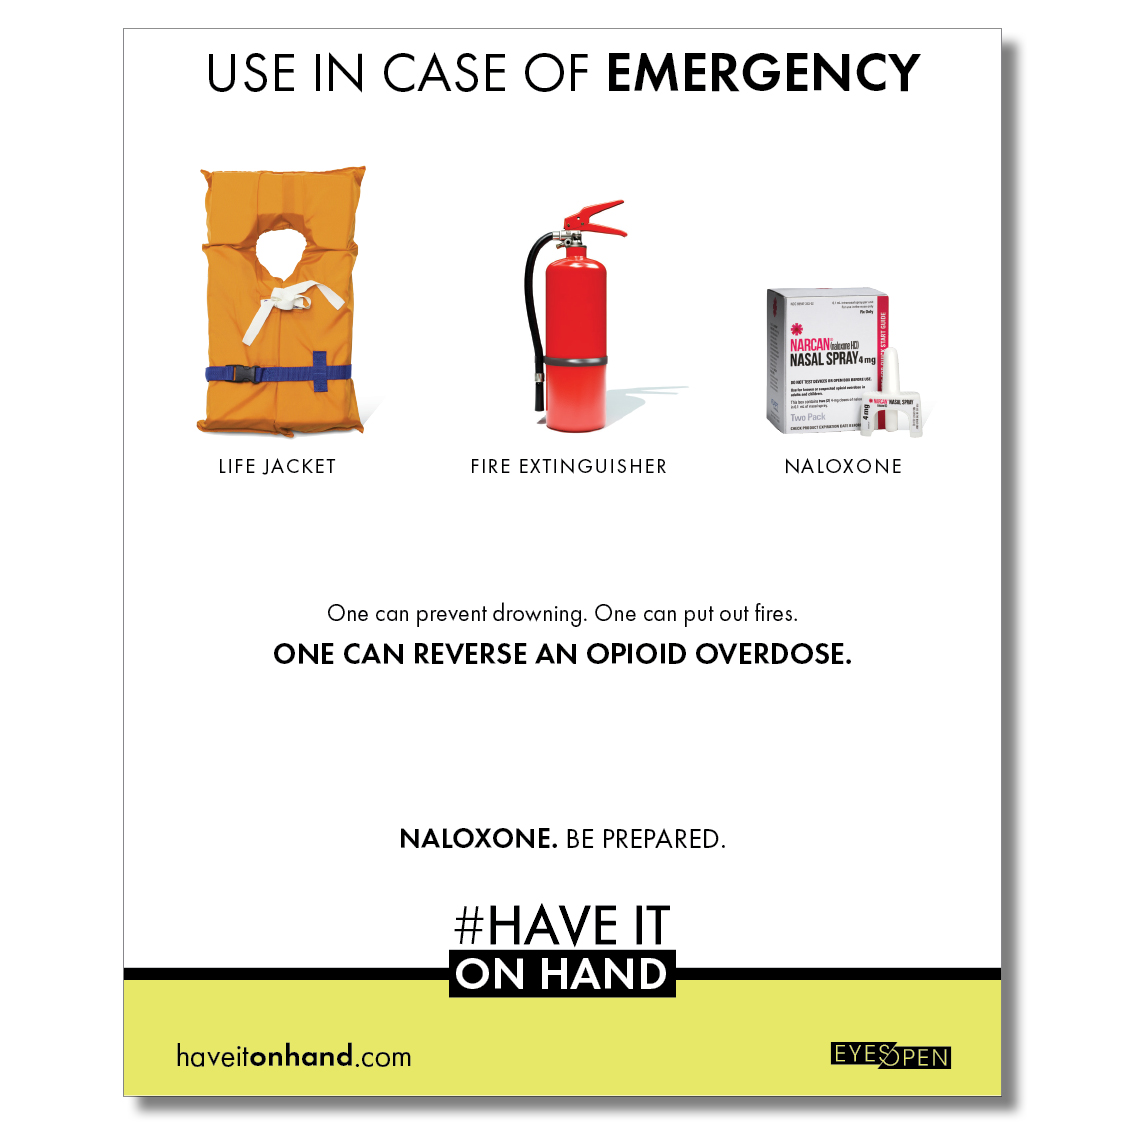 Naloxone-have-it-on-hand-poster